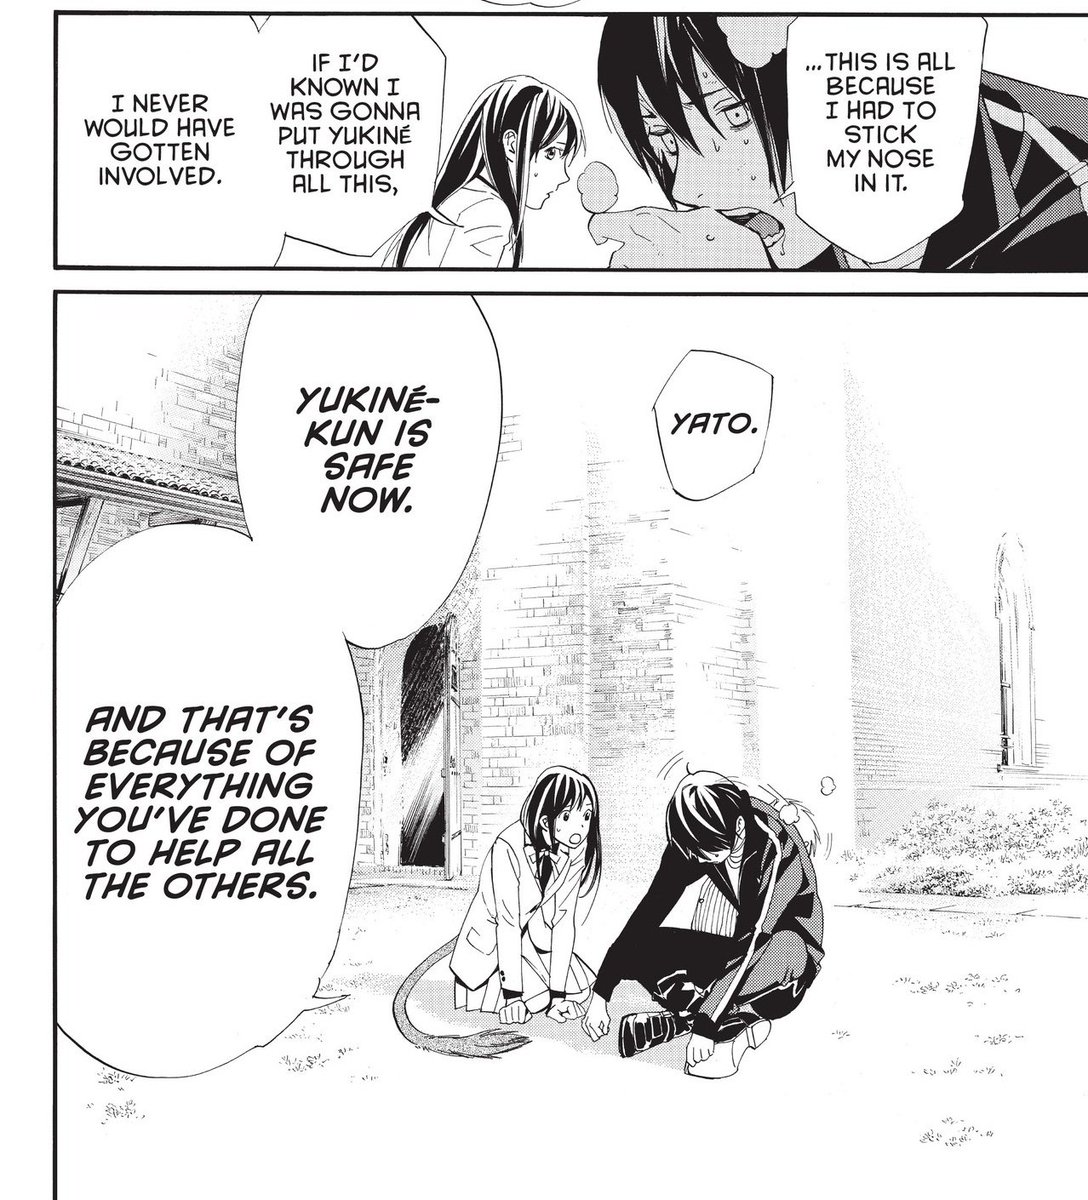 Respect for hiyori was already at peak but it just crossed peak right now 🤎 #Noragami ⛩